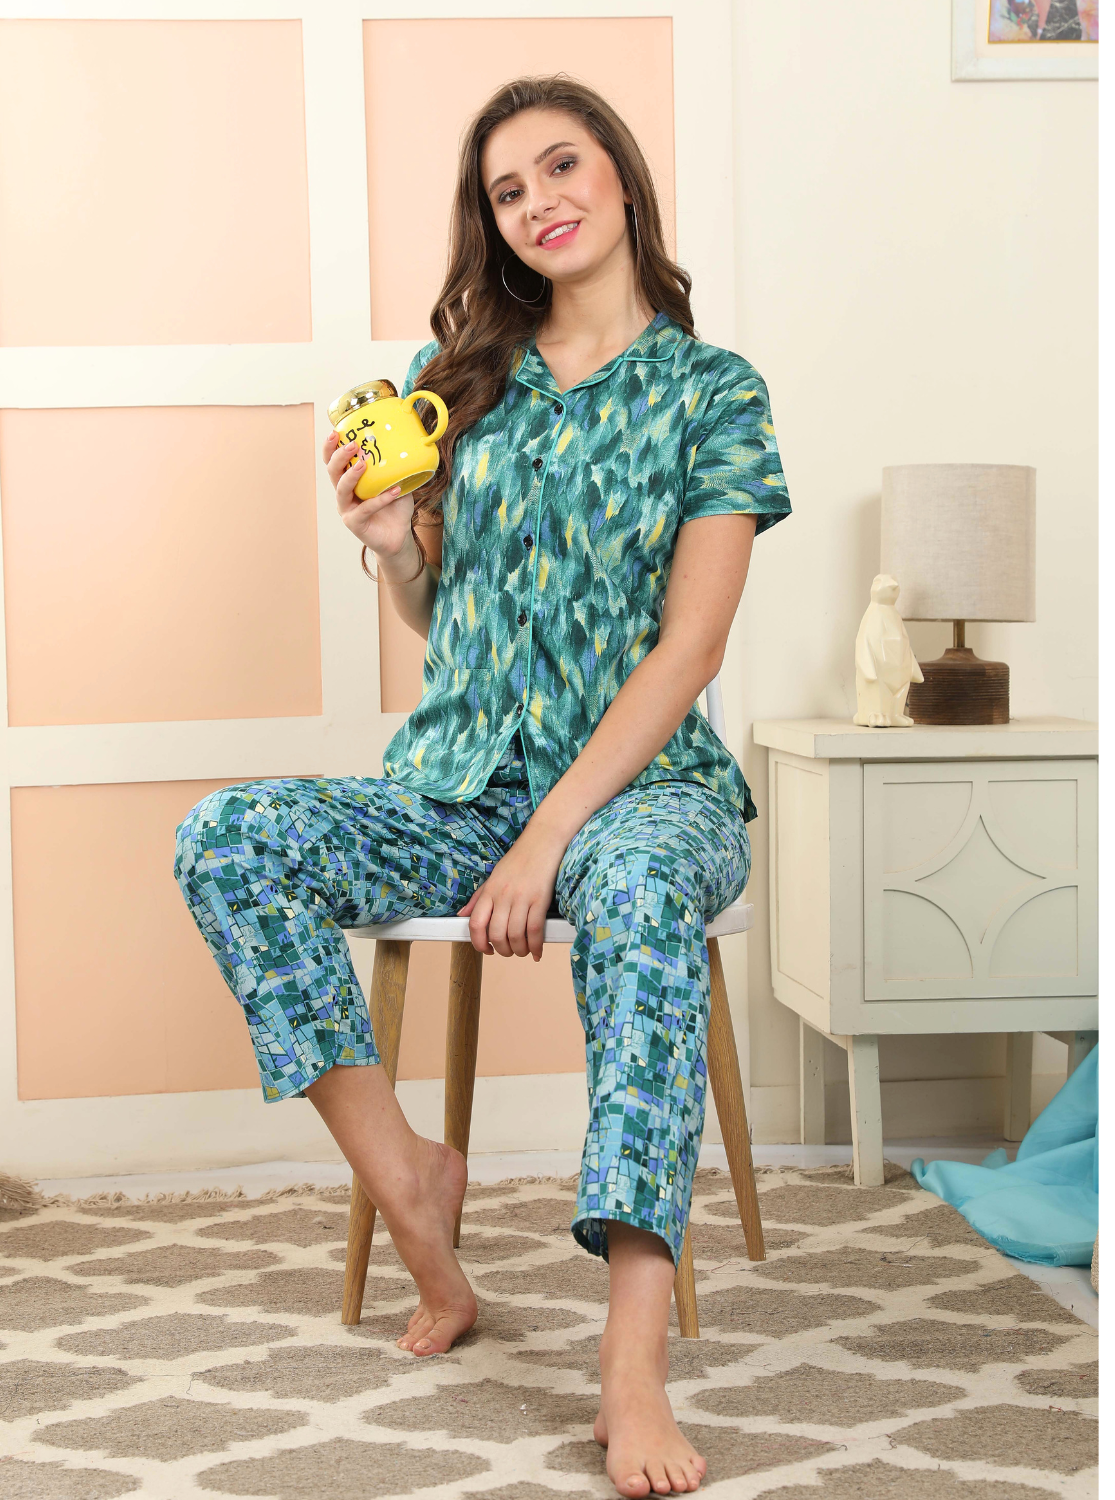 ONLY MINE SummerArrival Premium Cotton Night Suits - Latest Collection's Top & Bottom Set